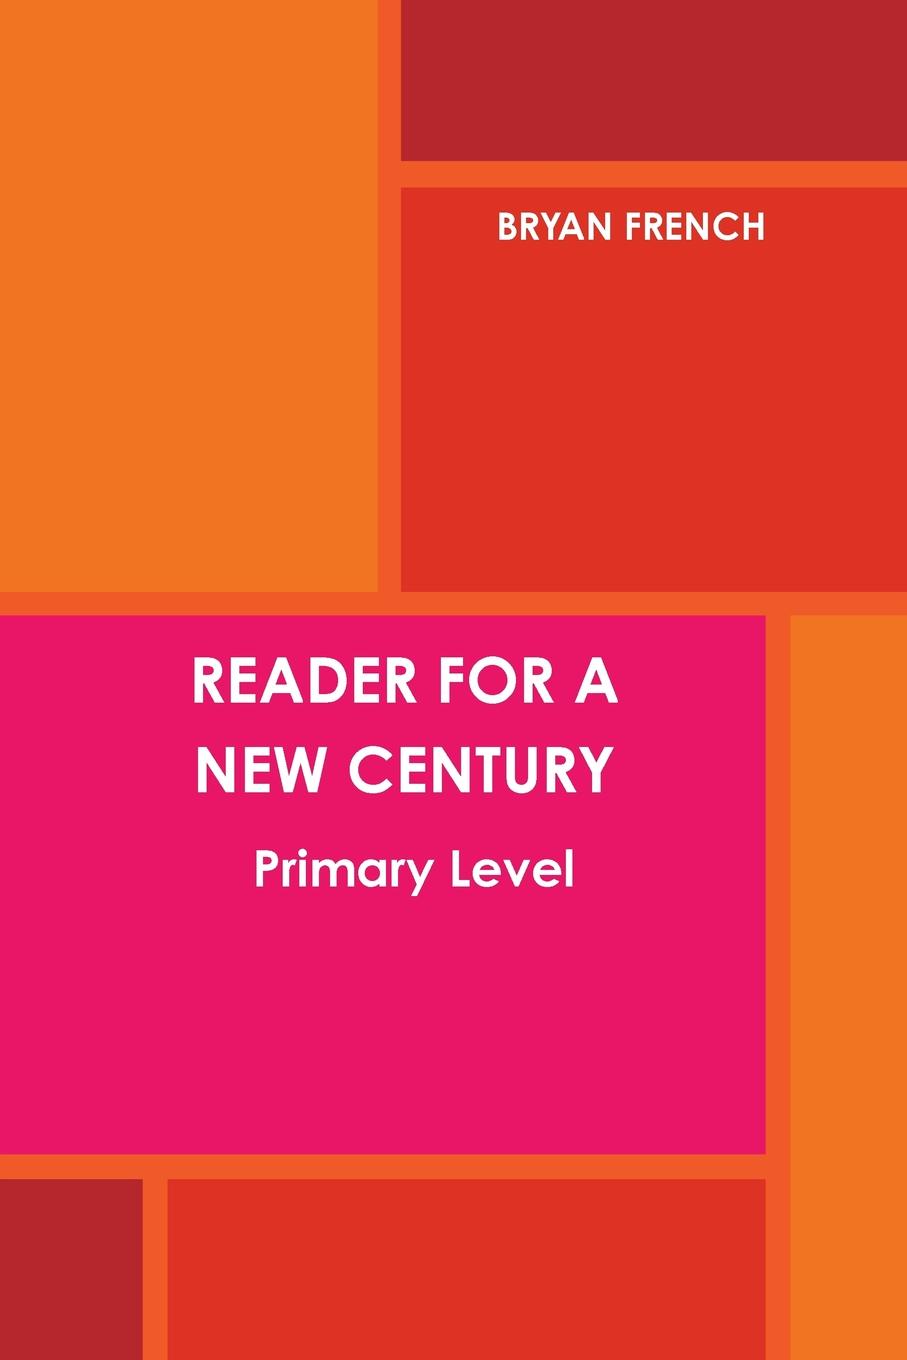 Reader for a New Century. Primary Level